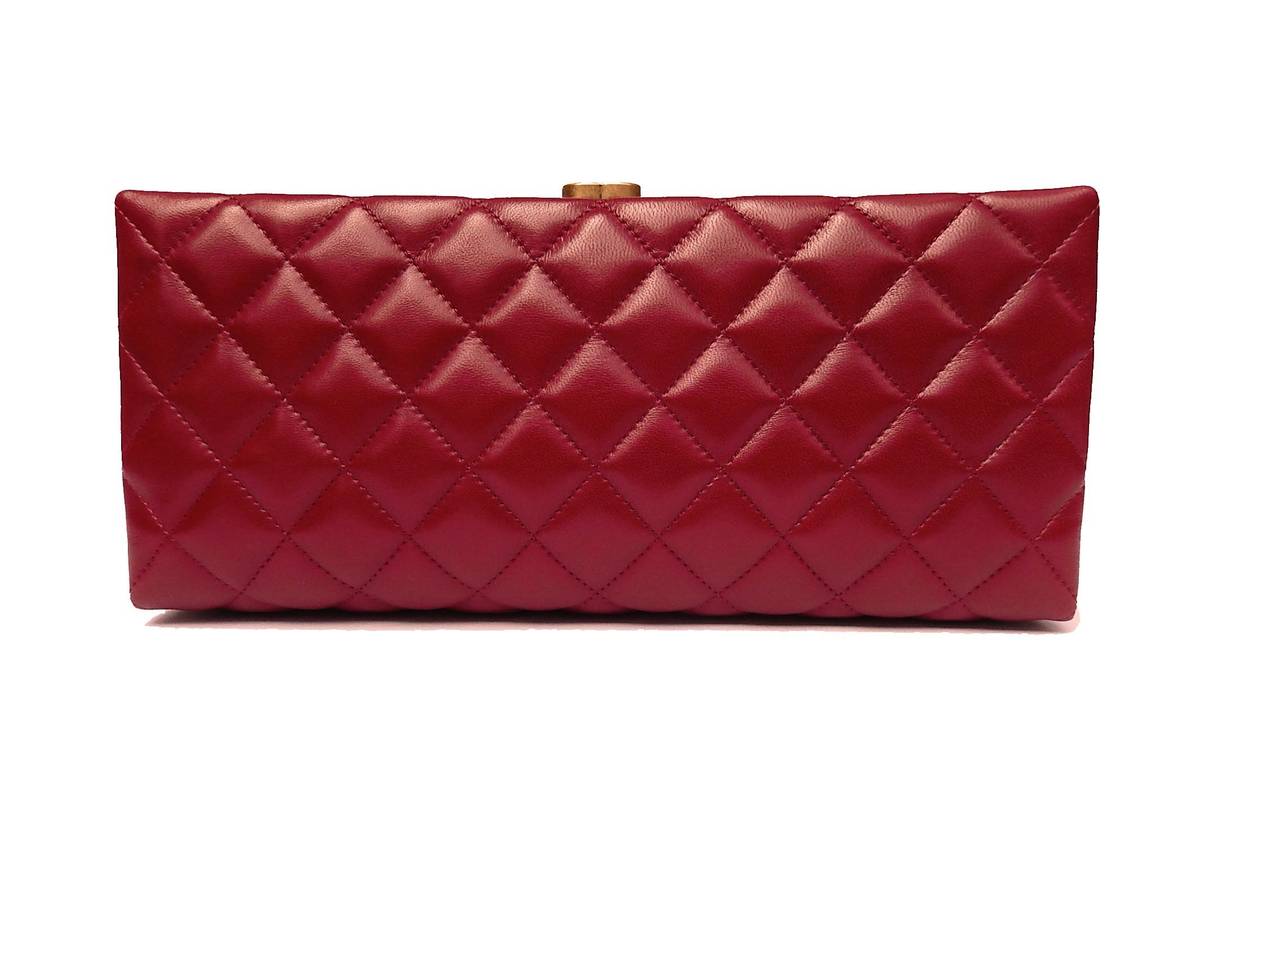 Brand new in Box Red Chanel Lambskin Clutch
Measures 11